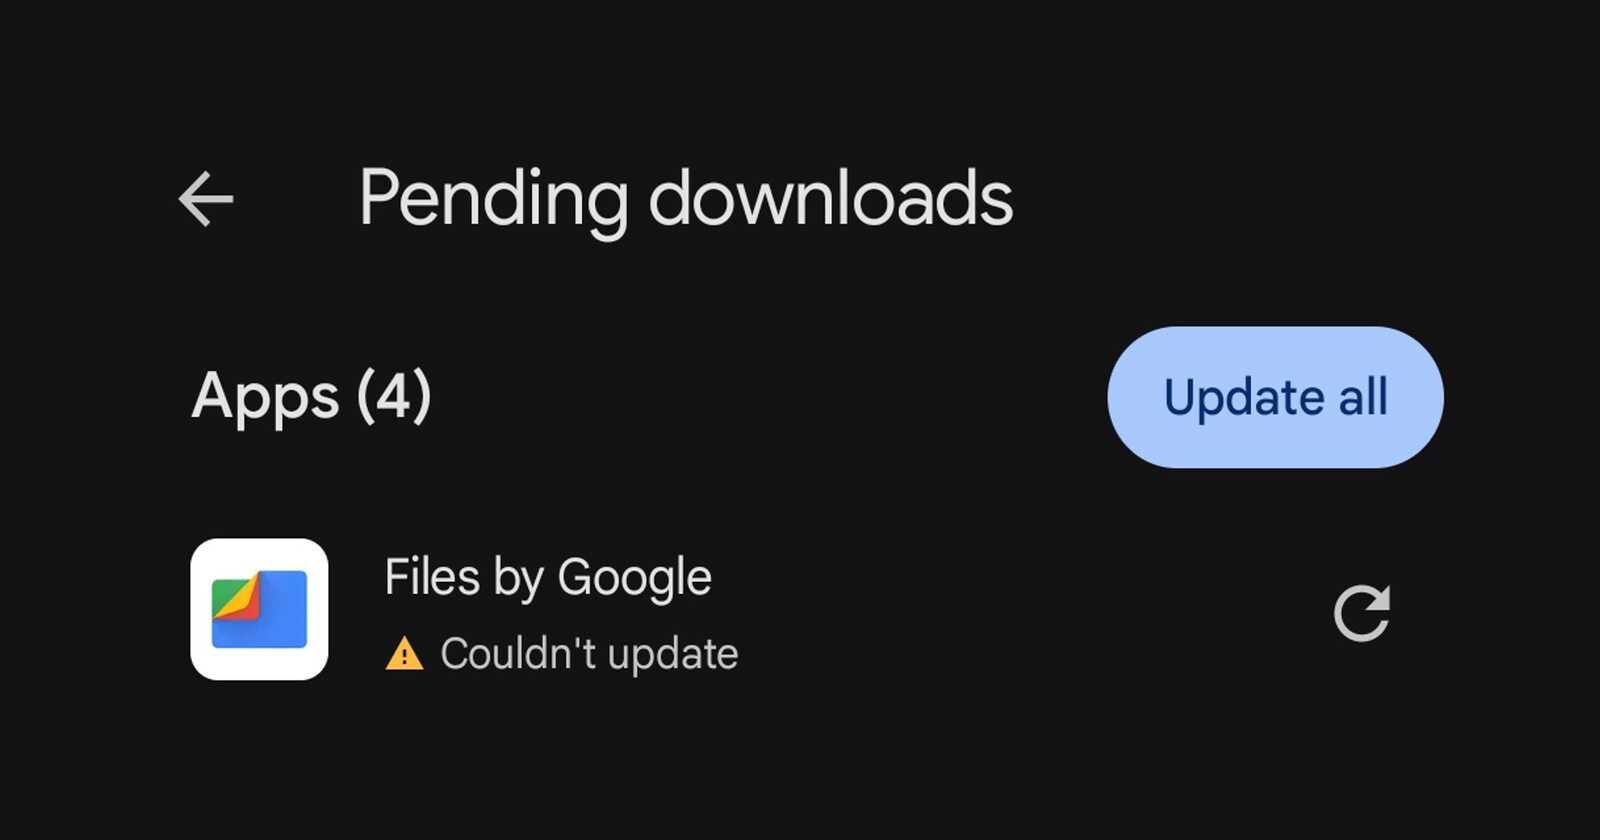 Files by Google app not updating on your Pixel phone? Here's how to fix it